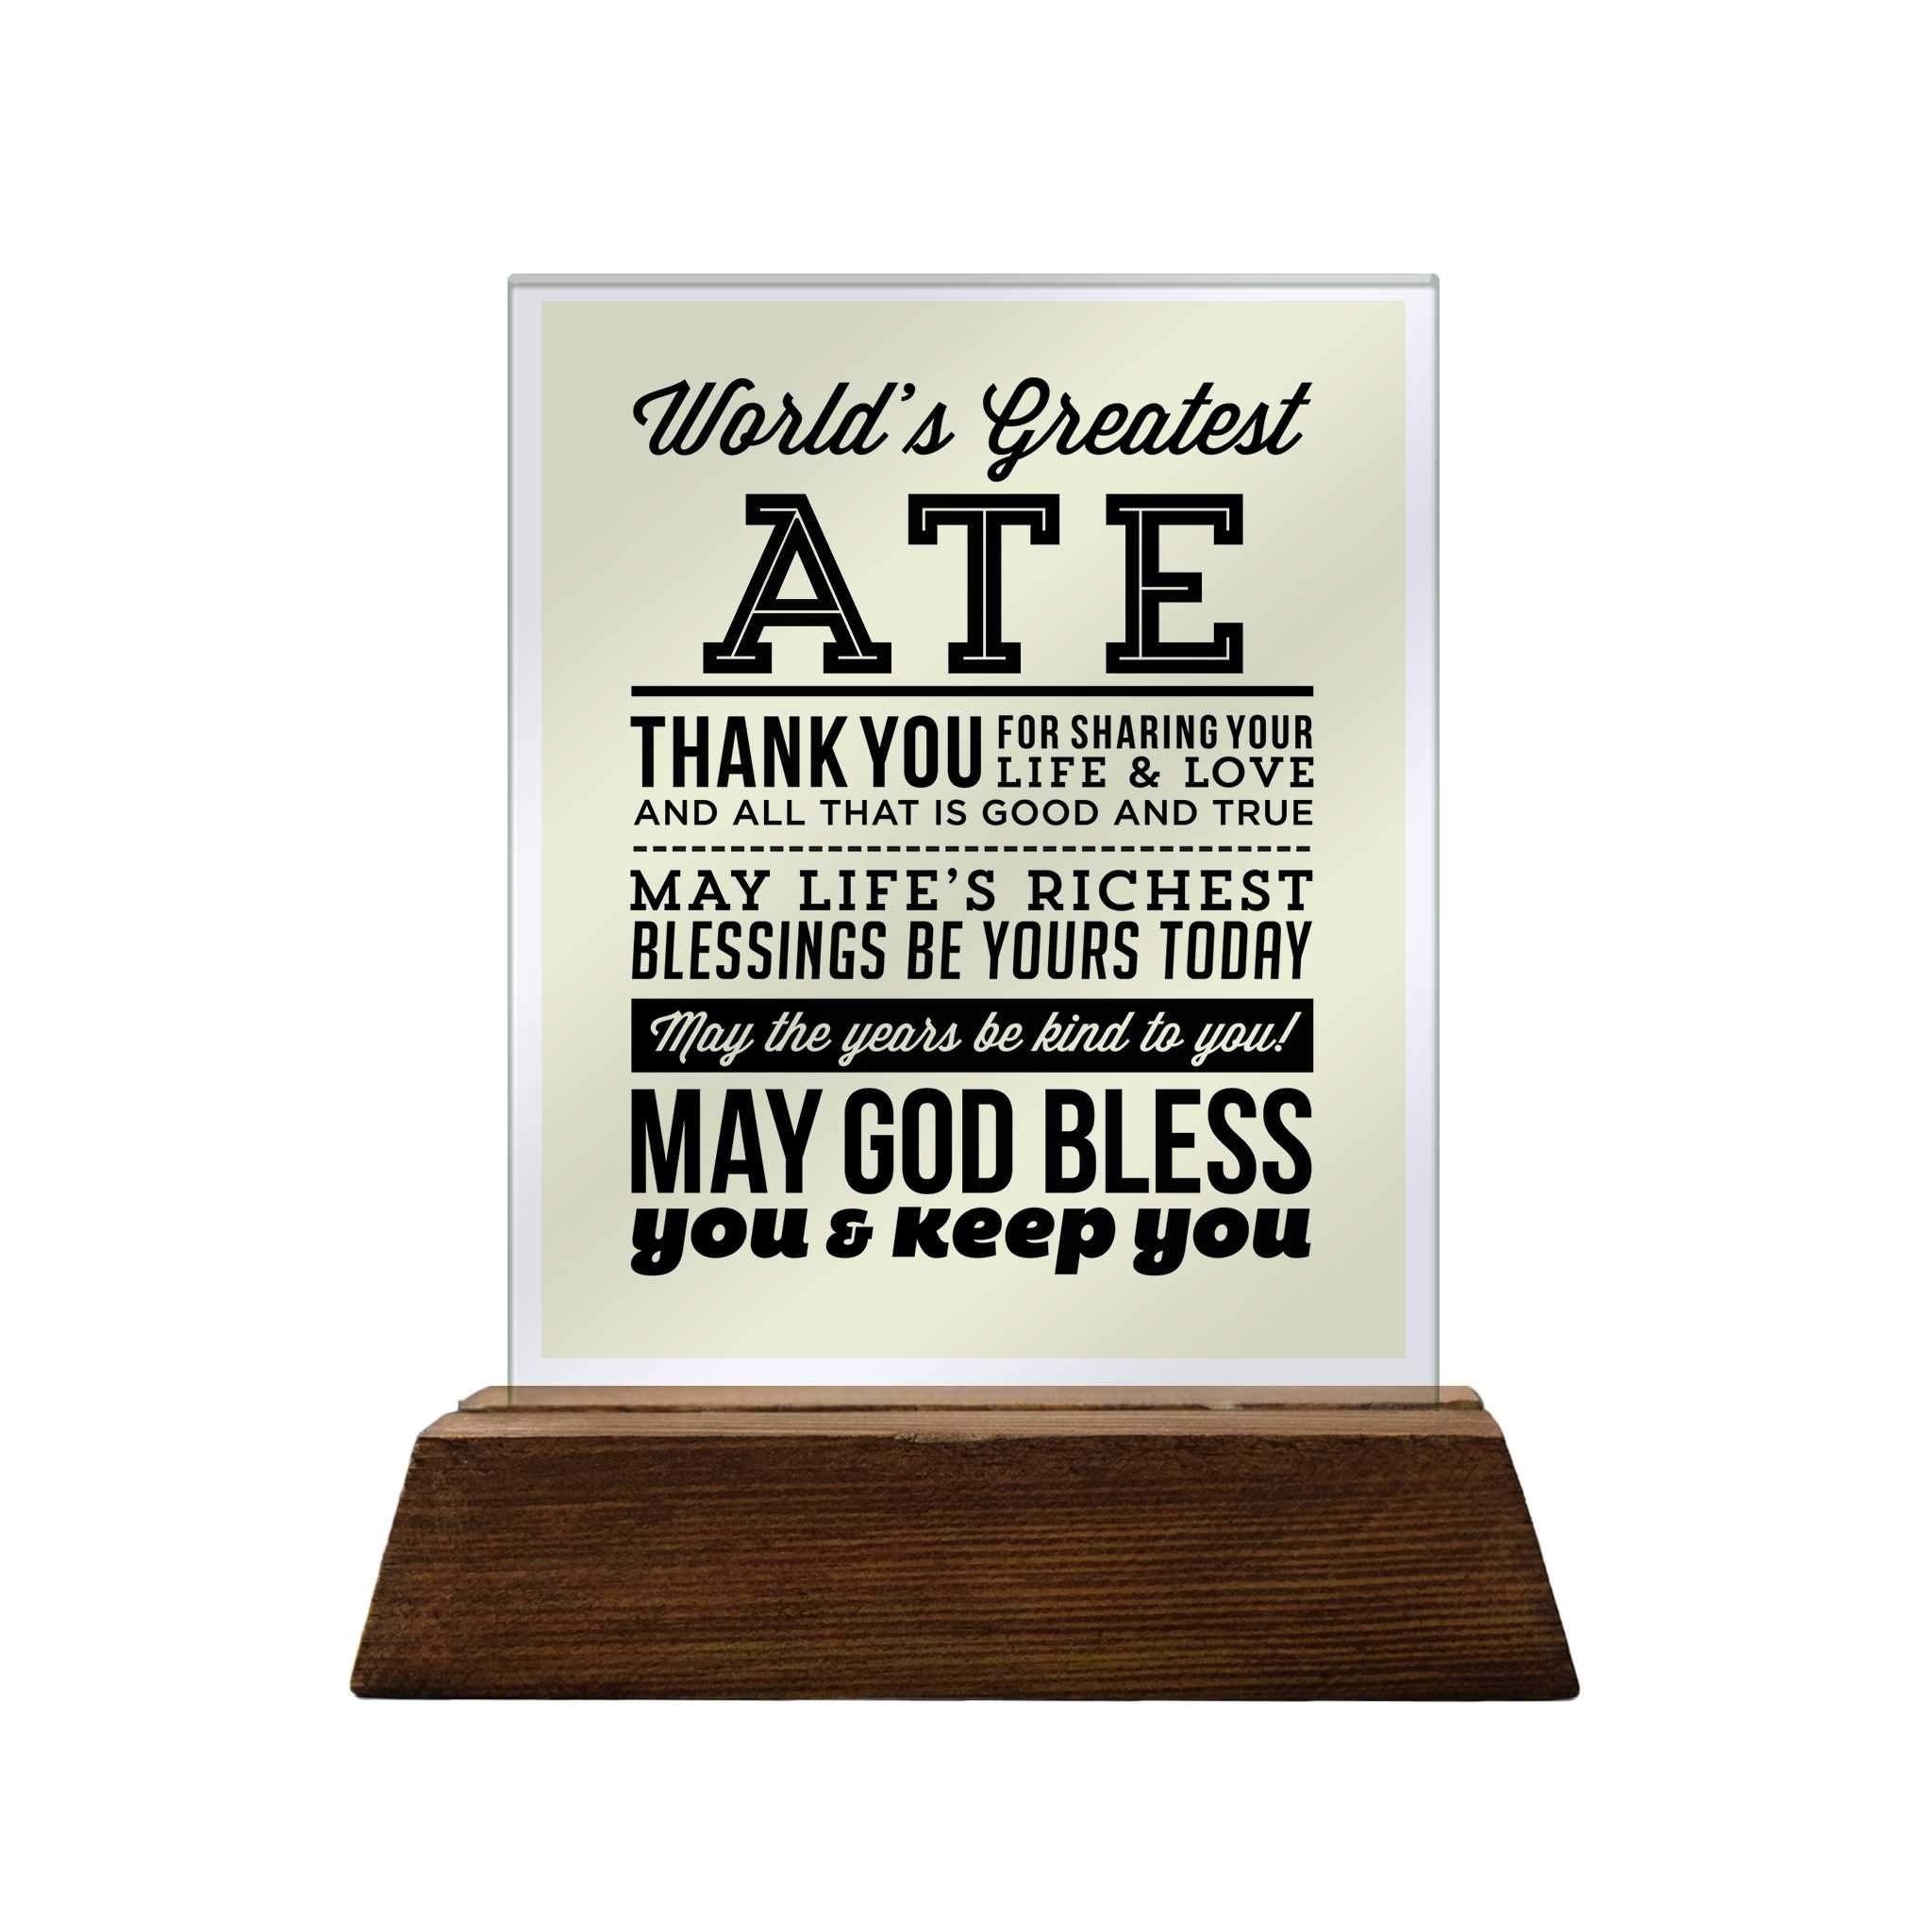 World's Greatest Ate Glass Plaque